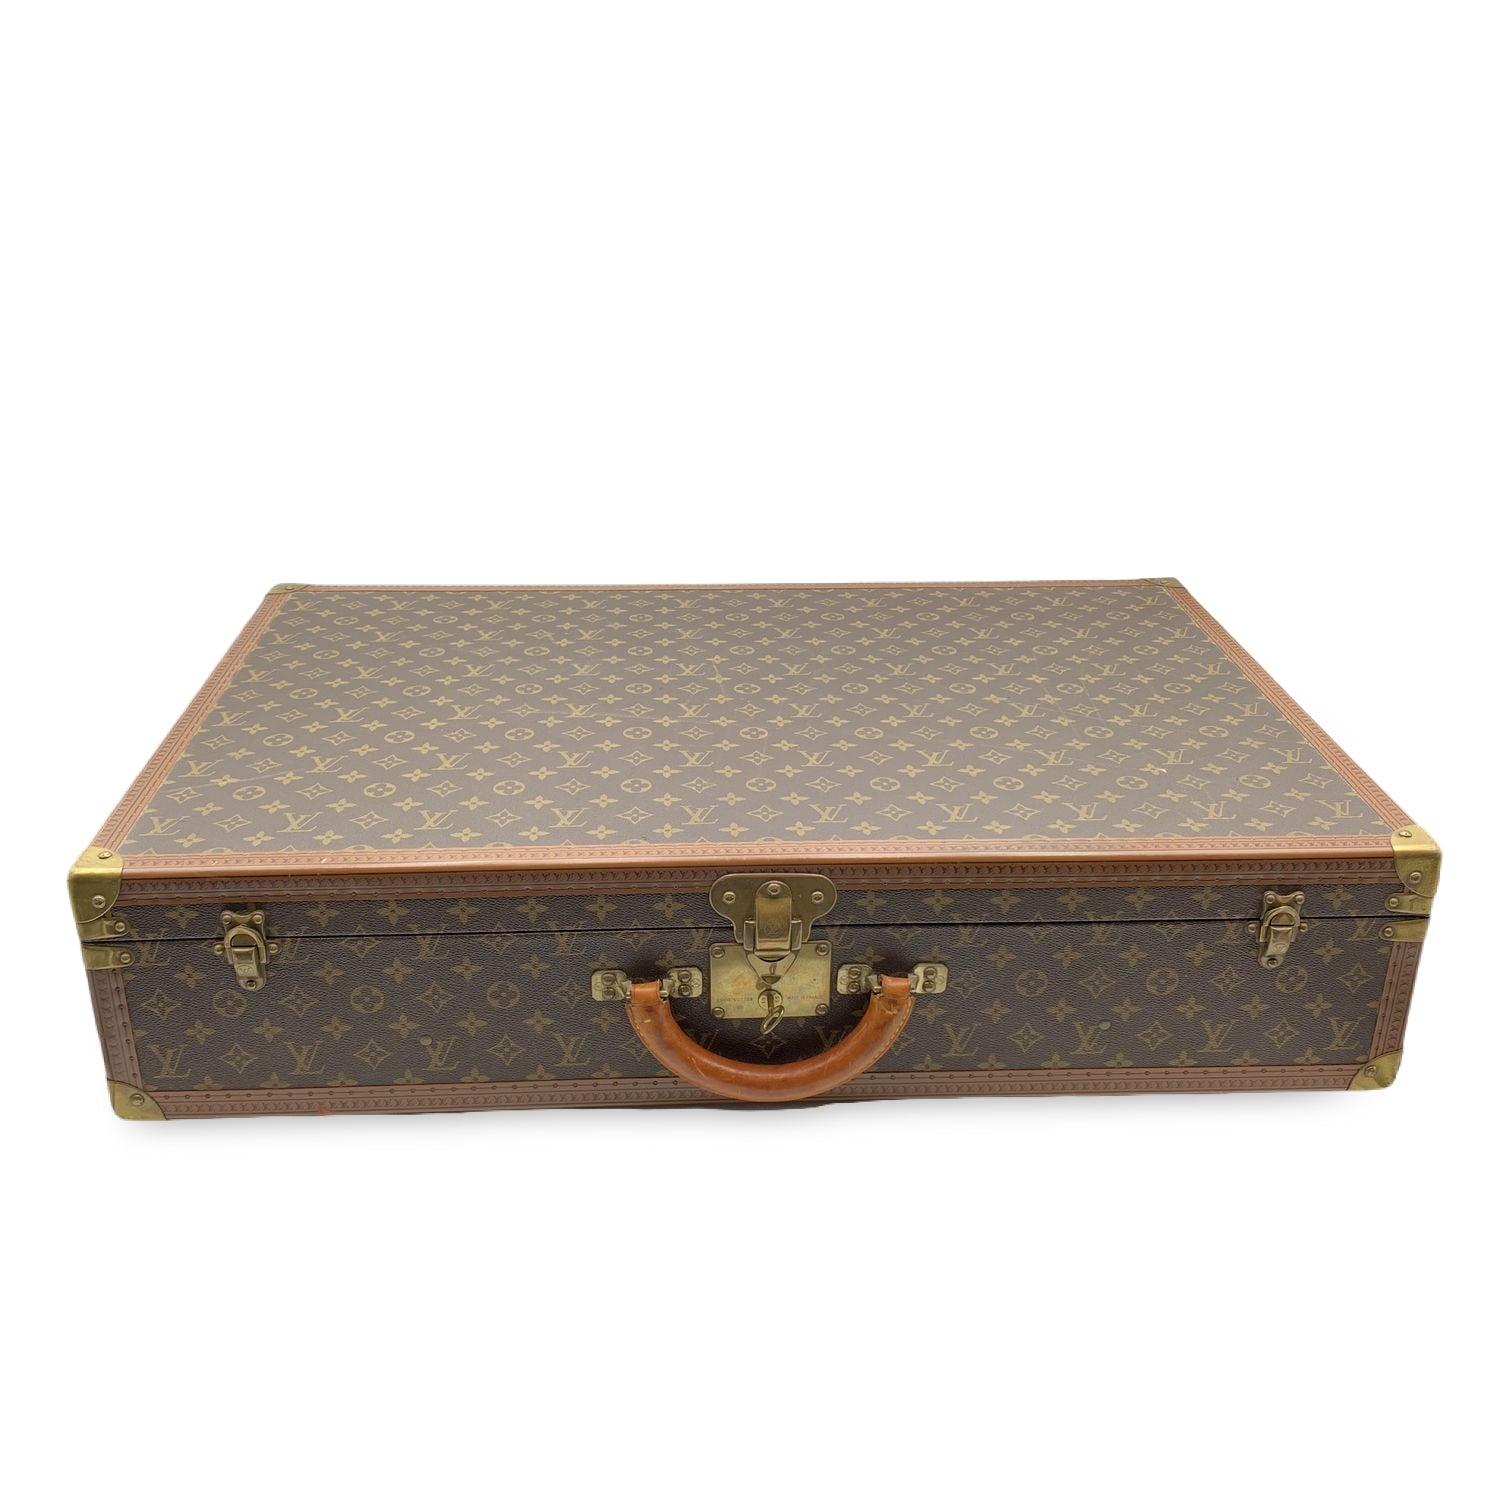 LOUIS VUITTON vintage Monogram Bisten 80 Suitcase. A part of Louis Vuitton history, ideal for travel or for home or office decor. Monogram canvas. LV monograms embossed on trim. Rounded leather handle. Canvas interior. Louis Vuitton 'S' lock with